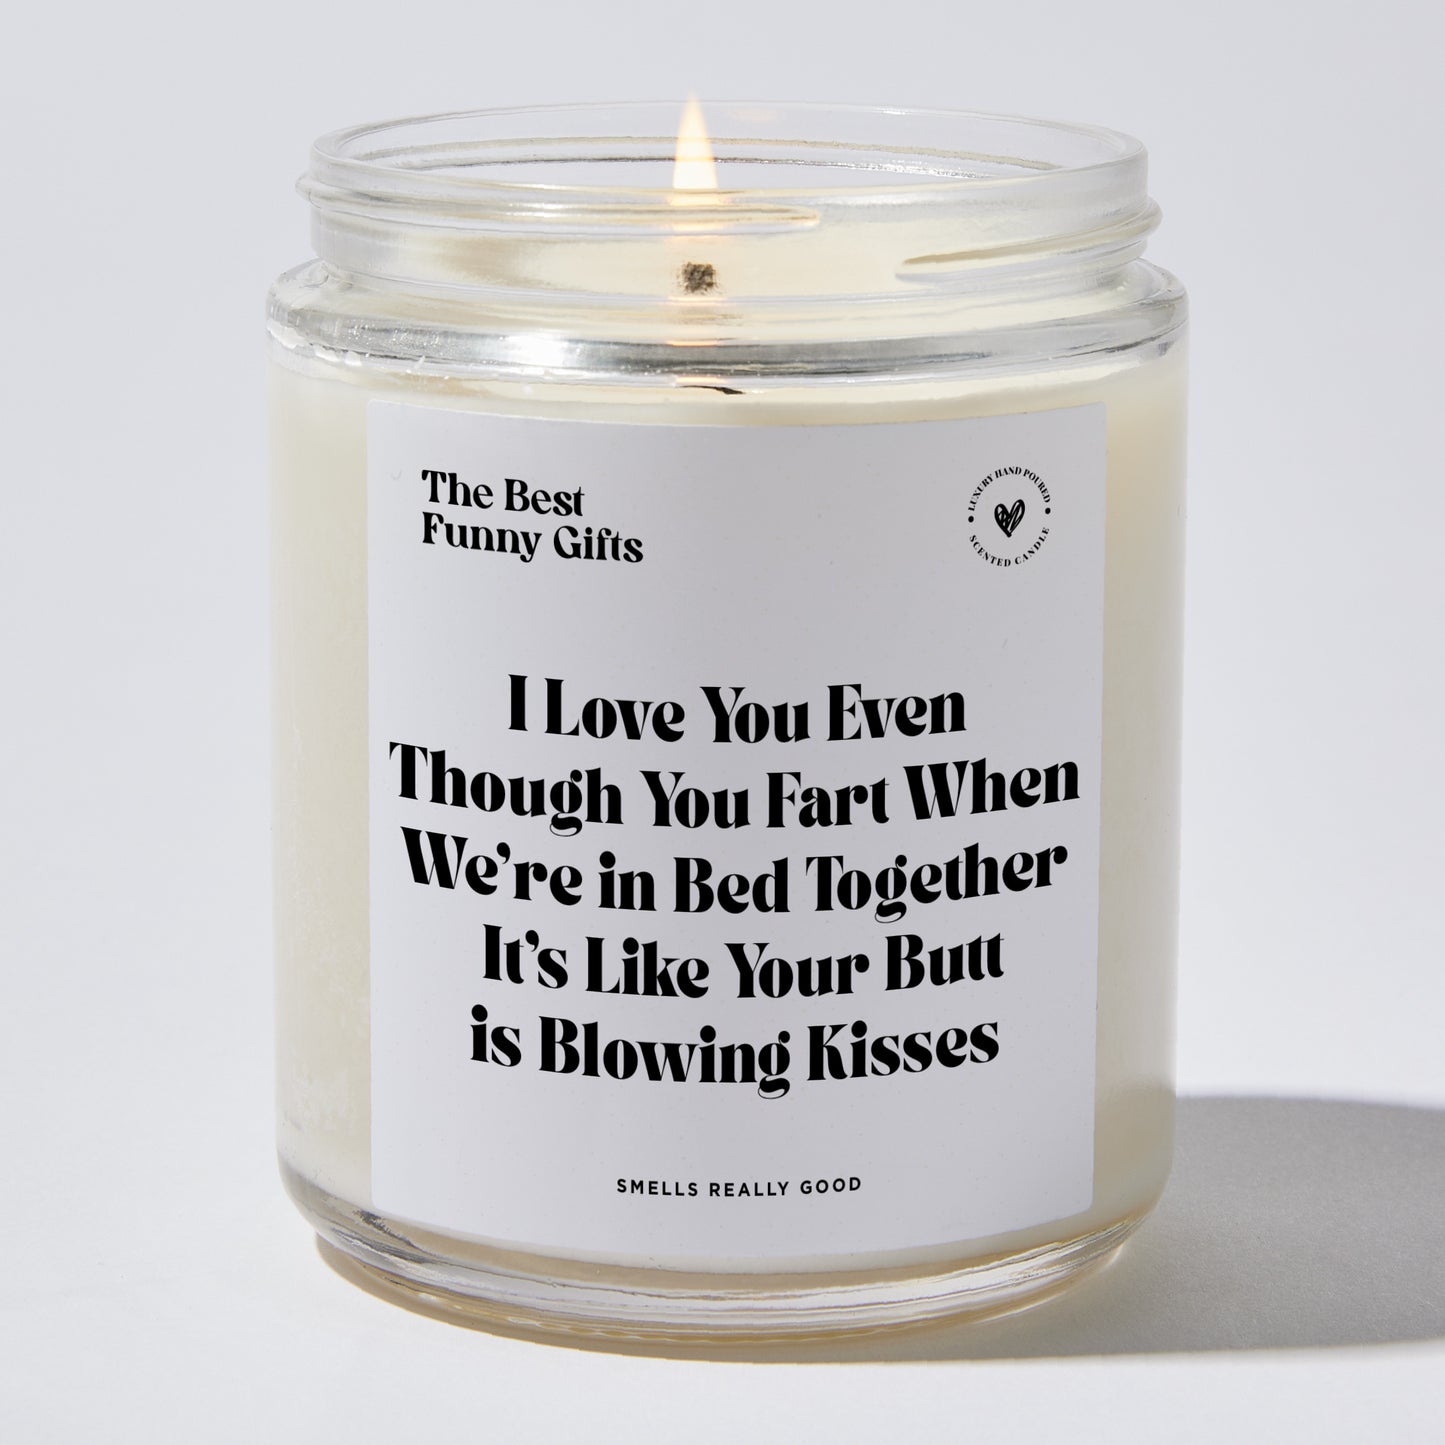 Anniversary Present - I Love You Even Though You Fart When We're in Bed Together. It's Like Your Butt is Blowing Kisses - Candle